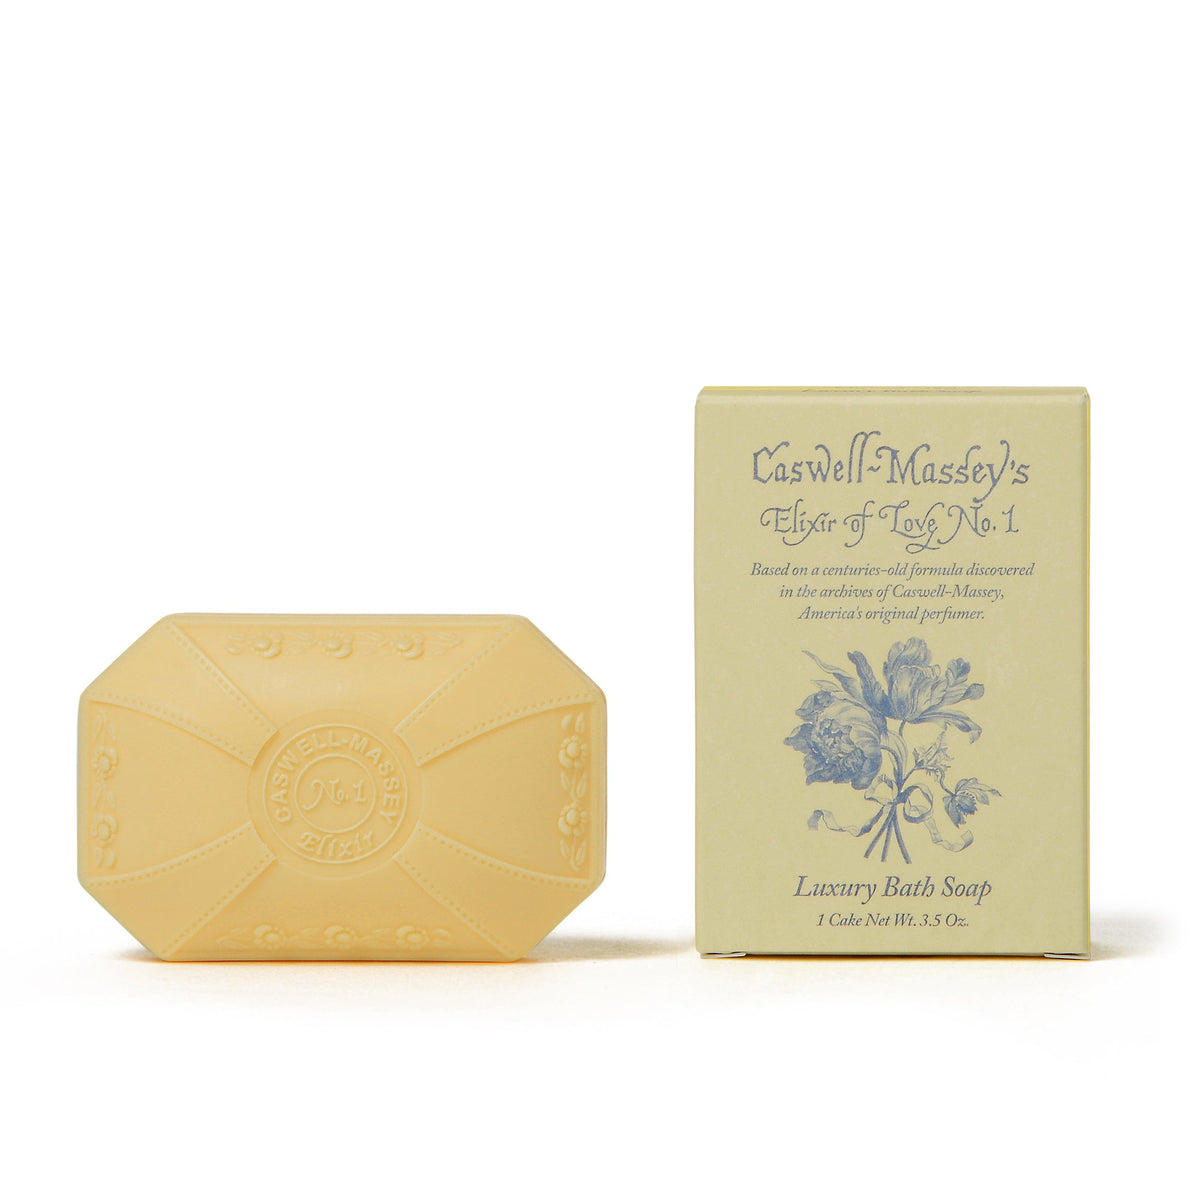 A bar of luxury Caswell - Massey Elixir of Love Bar Soap alongside its yellow packaging, decorated with vintage floral graphics and inscriptions marking it as "Caswell-Massey" and "est. 1815".